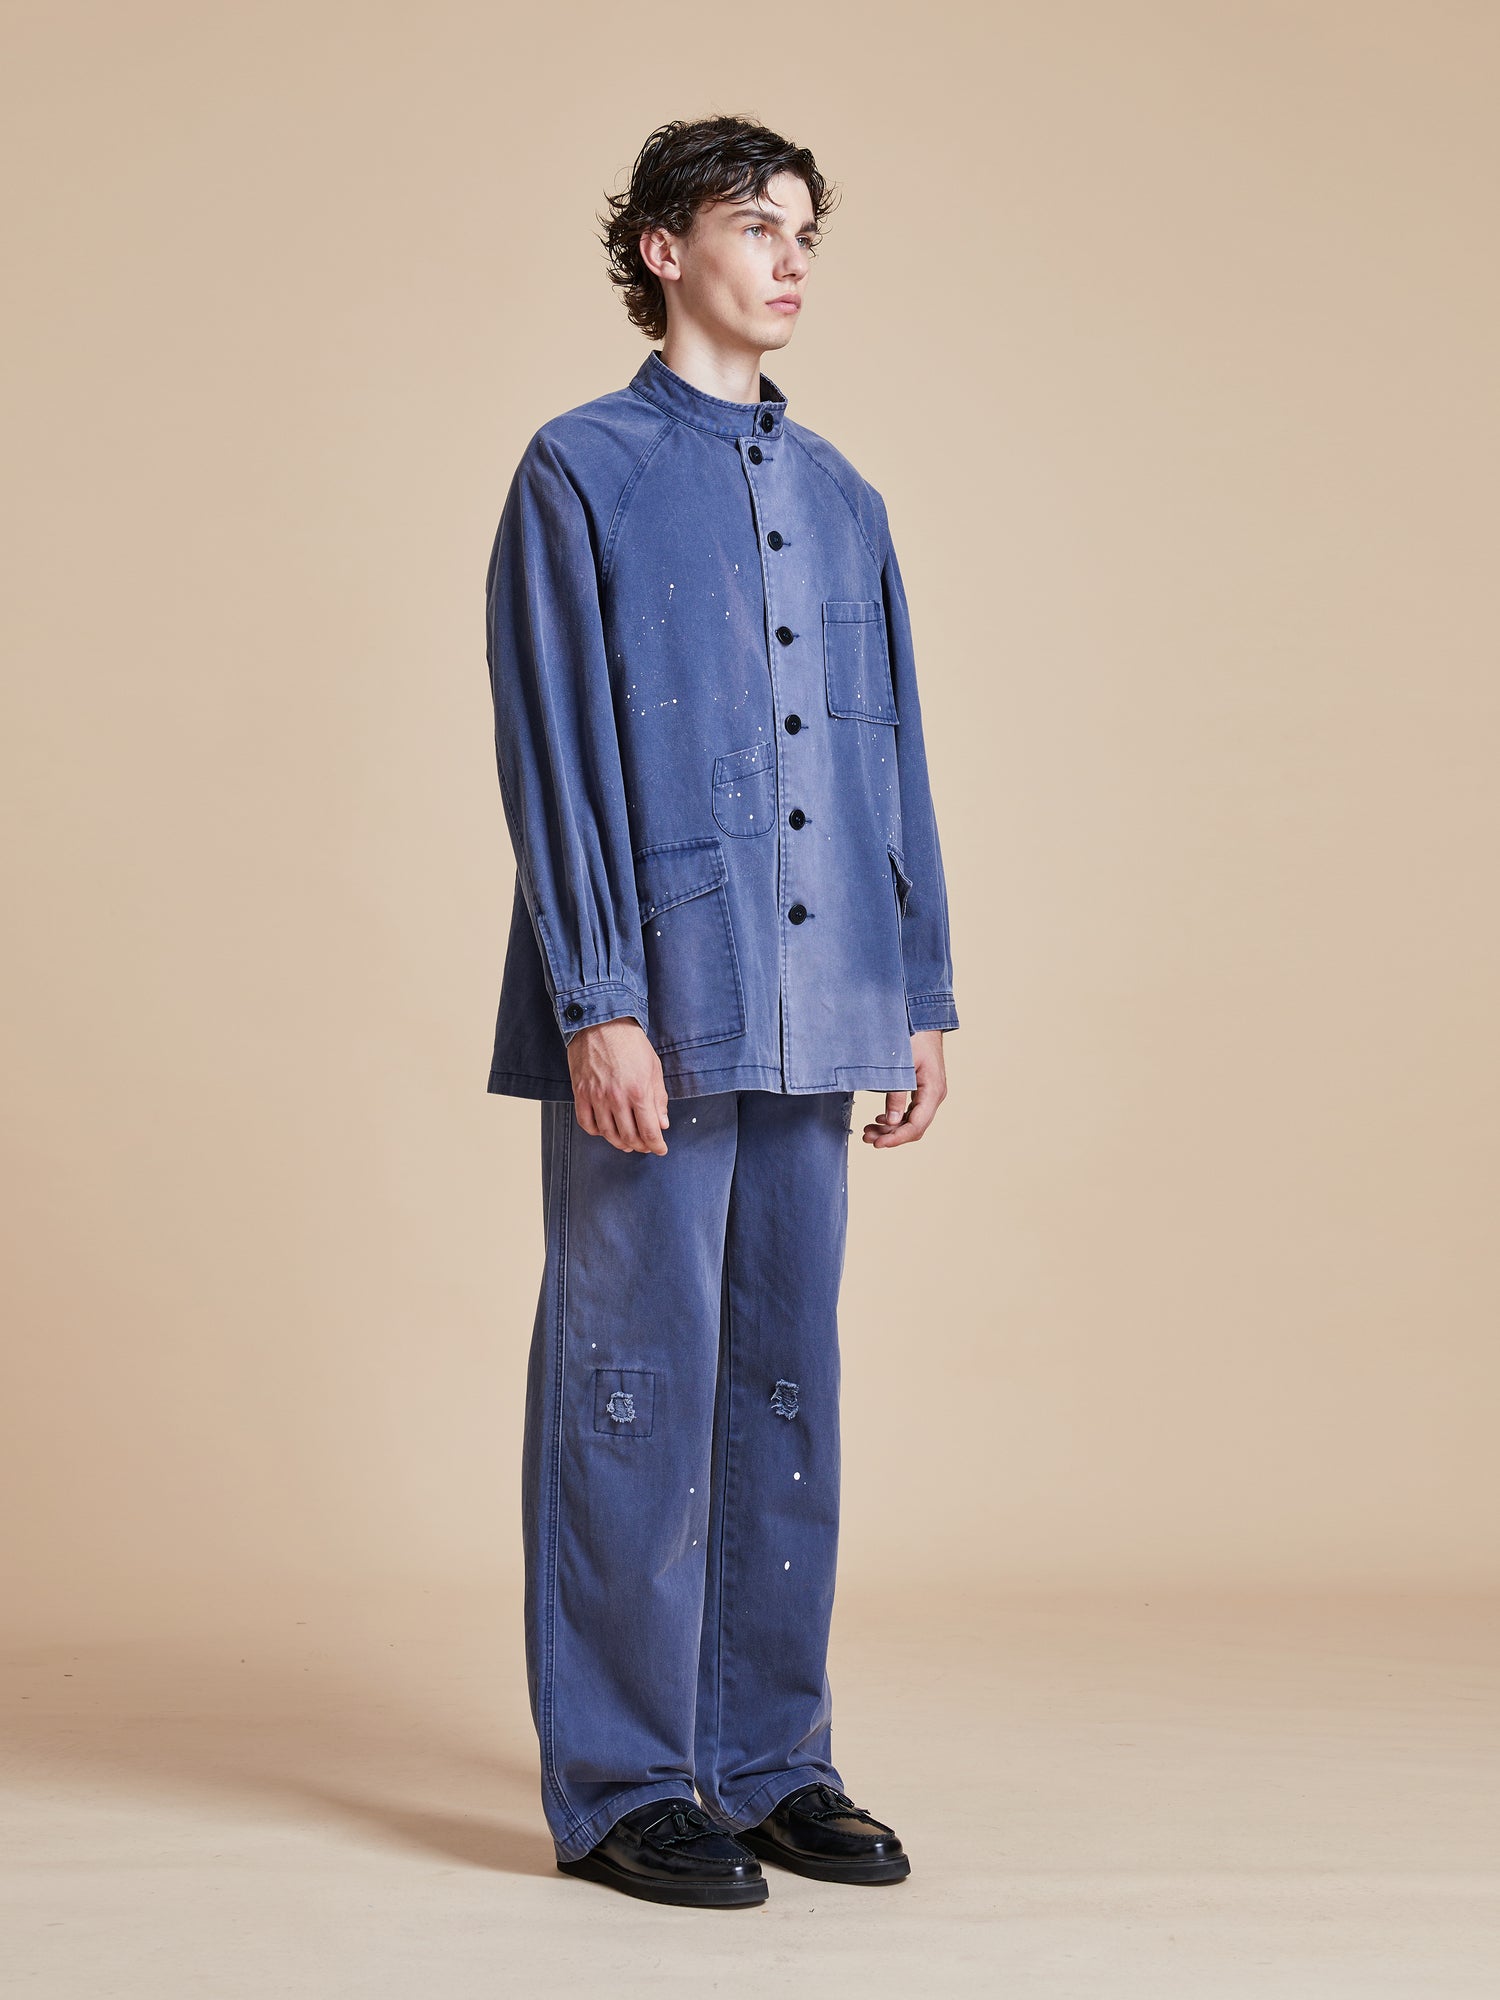 The model is wearing a River Painters Chore Coat denim shirt and pants by Found.